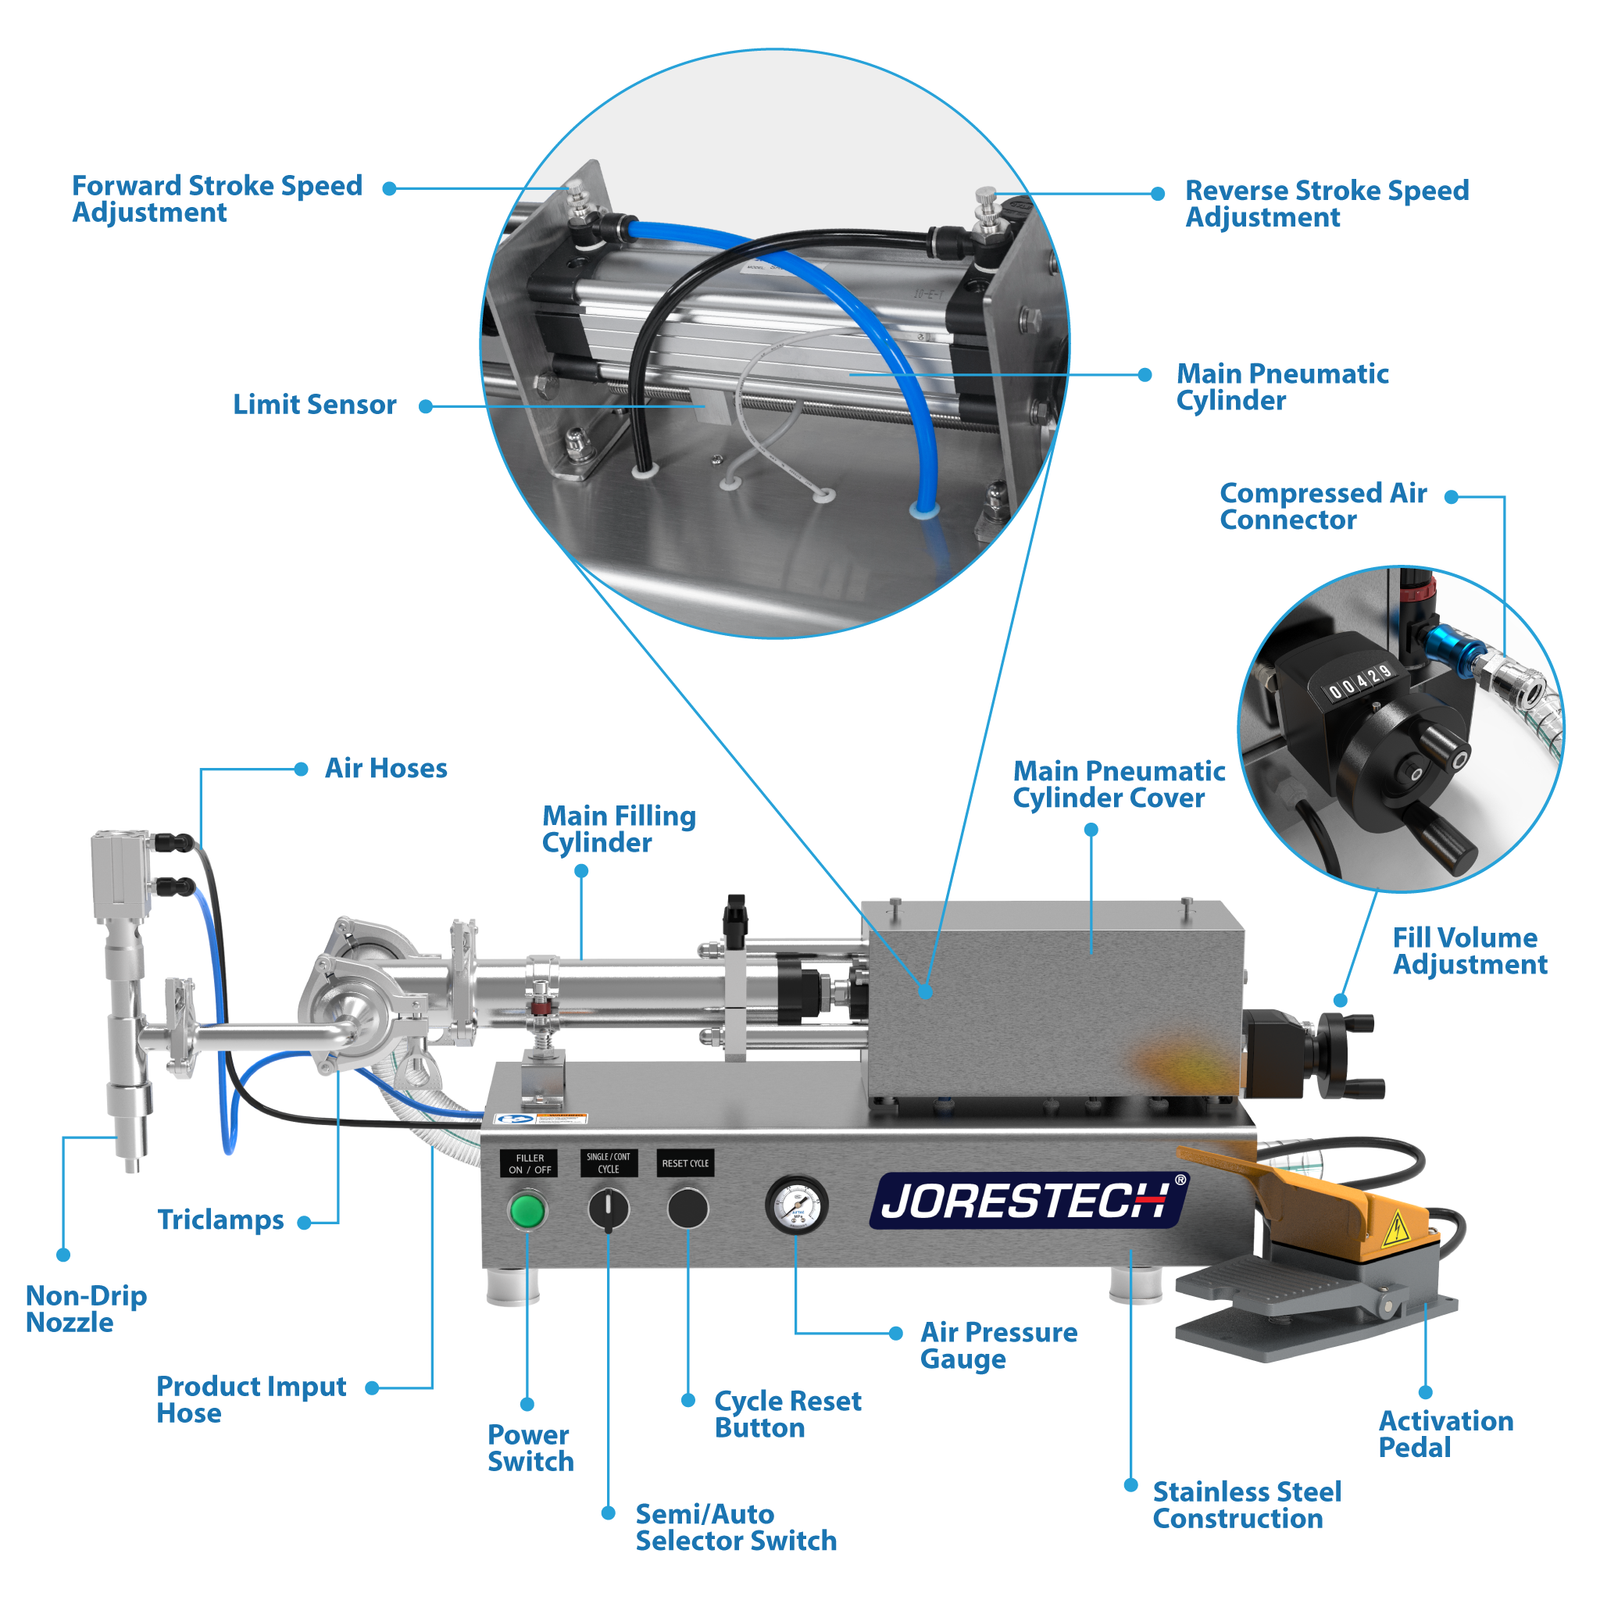 Parts of the low viscosity liquid piston filler. Call-outs are signaling different parts of the machine. Two of the main parts mentioned are the Main Pneumatic Cylinder and the Fill Volume Adjuster